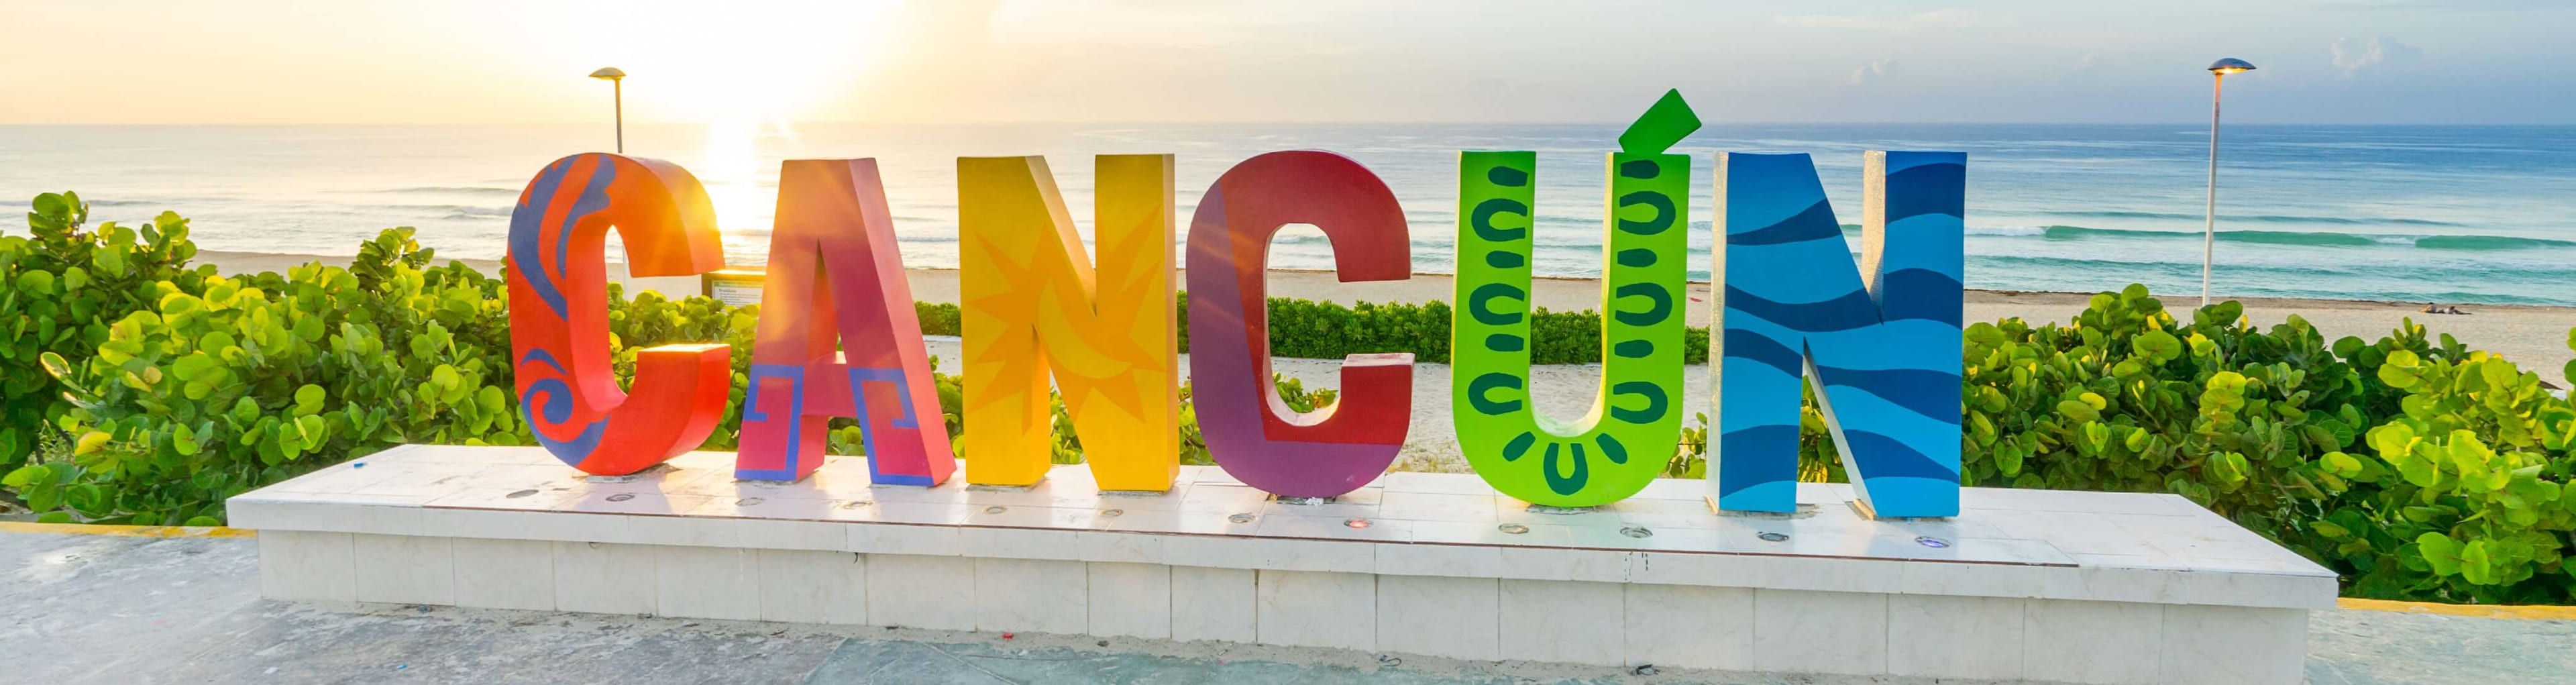 A colorful Cancun sign standing by the ocean